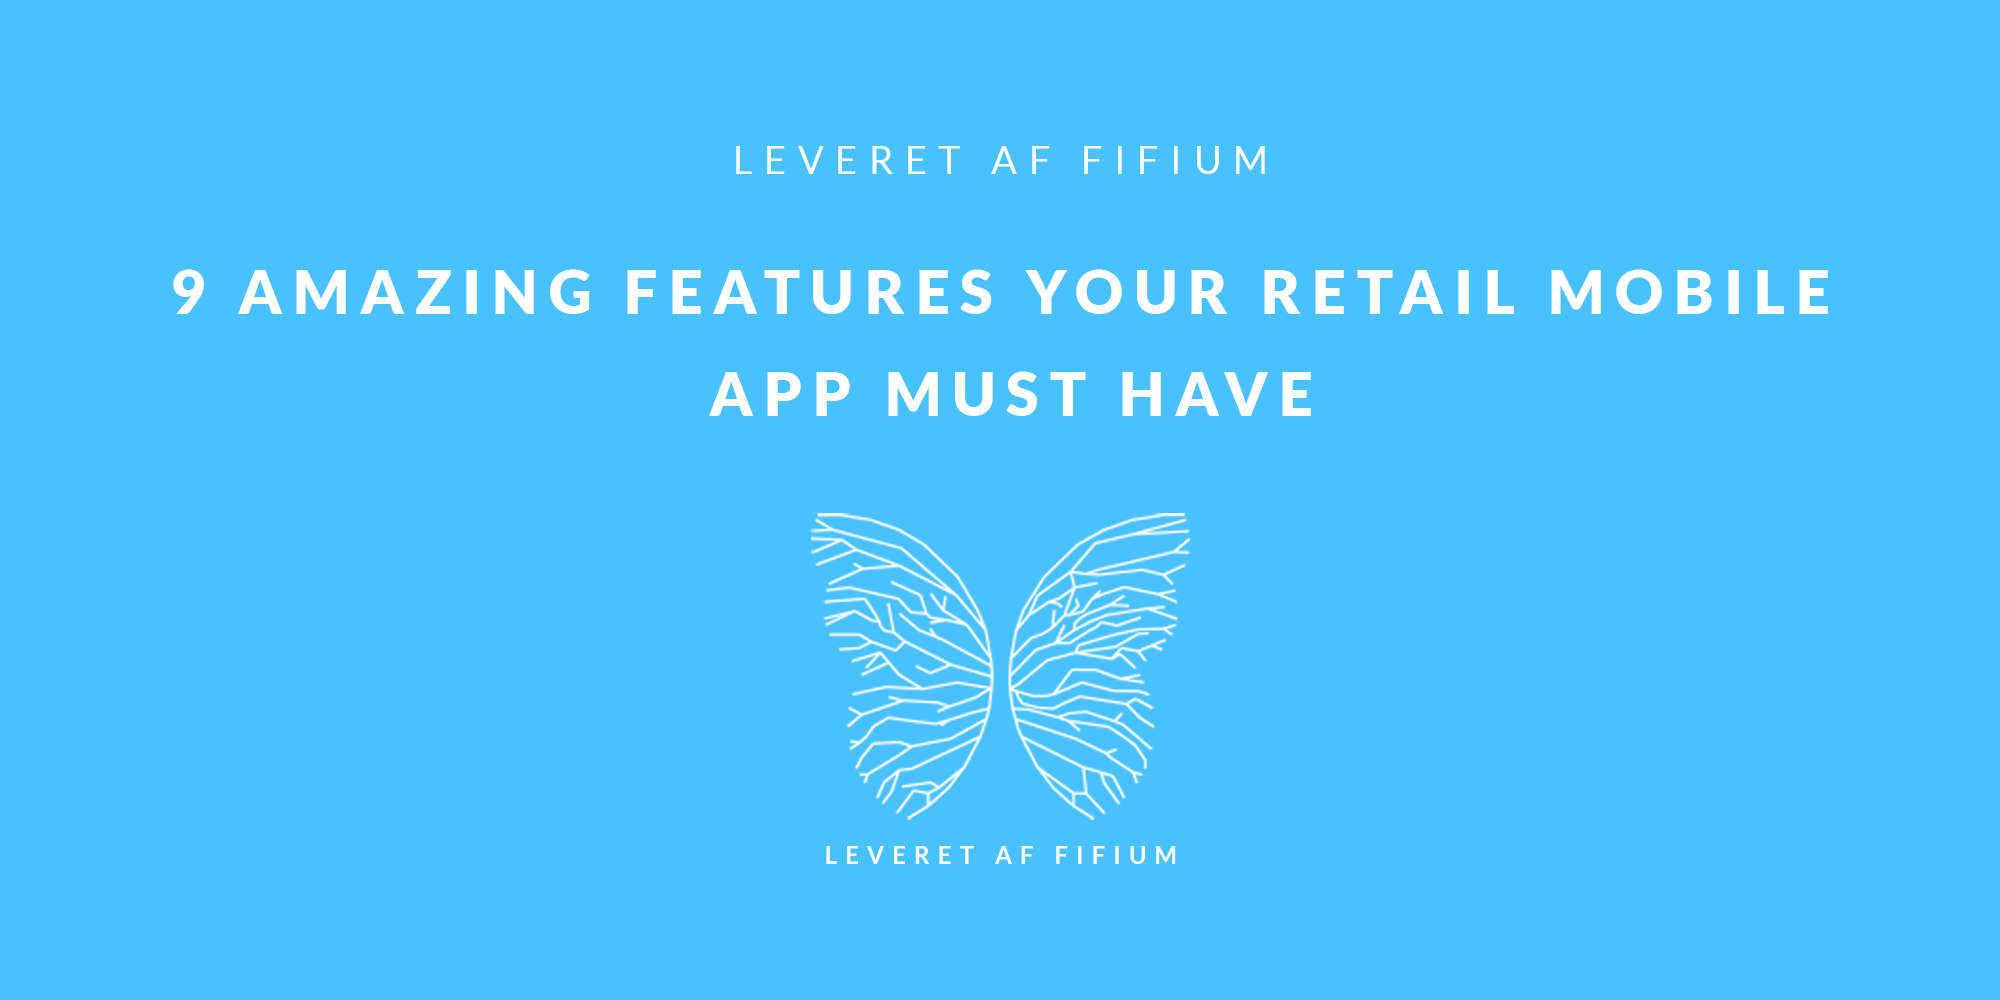 9 Amazing Features Your Retail Mobile App Must Have